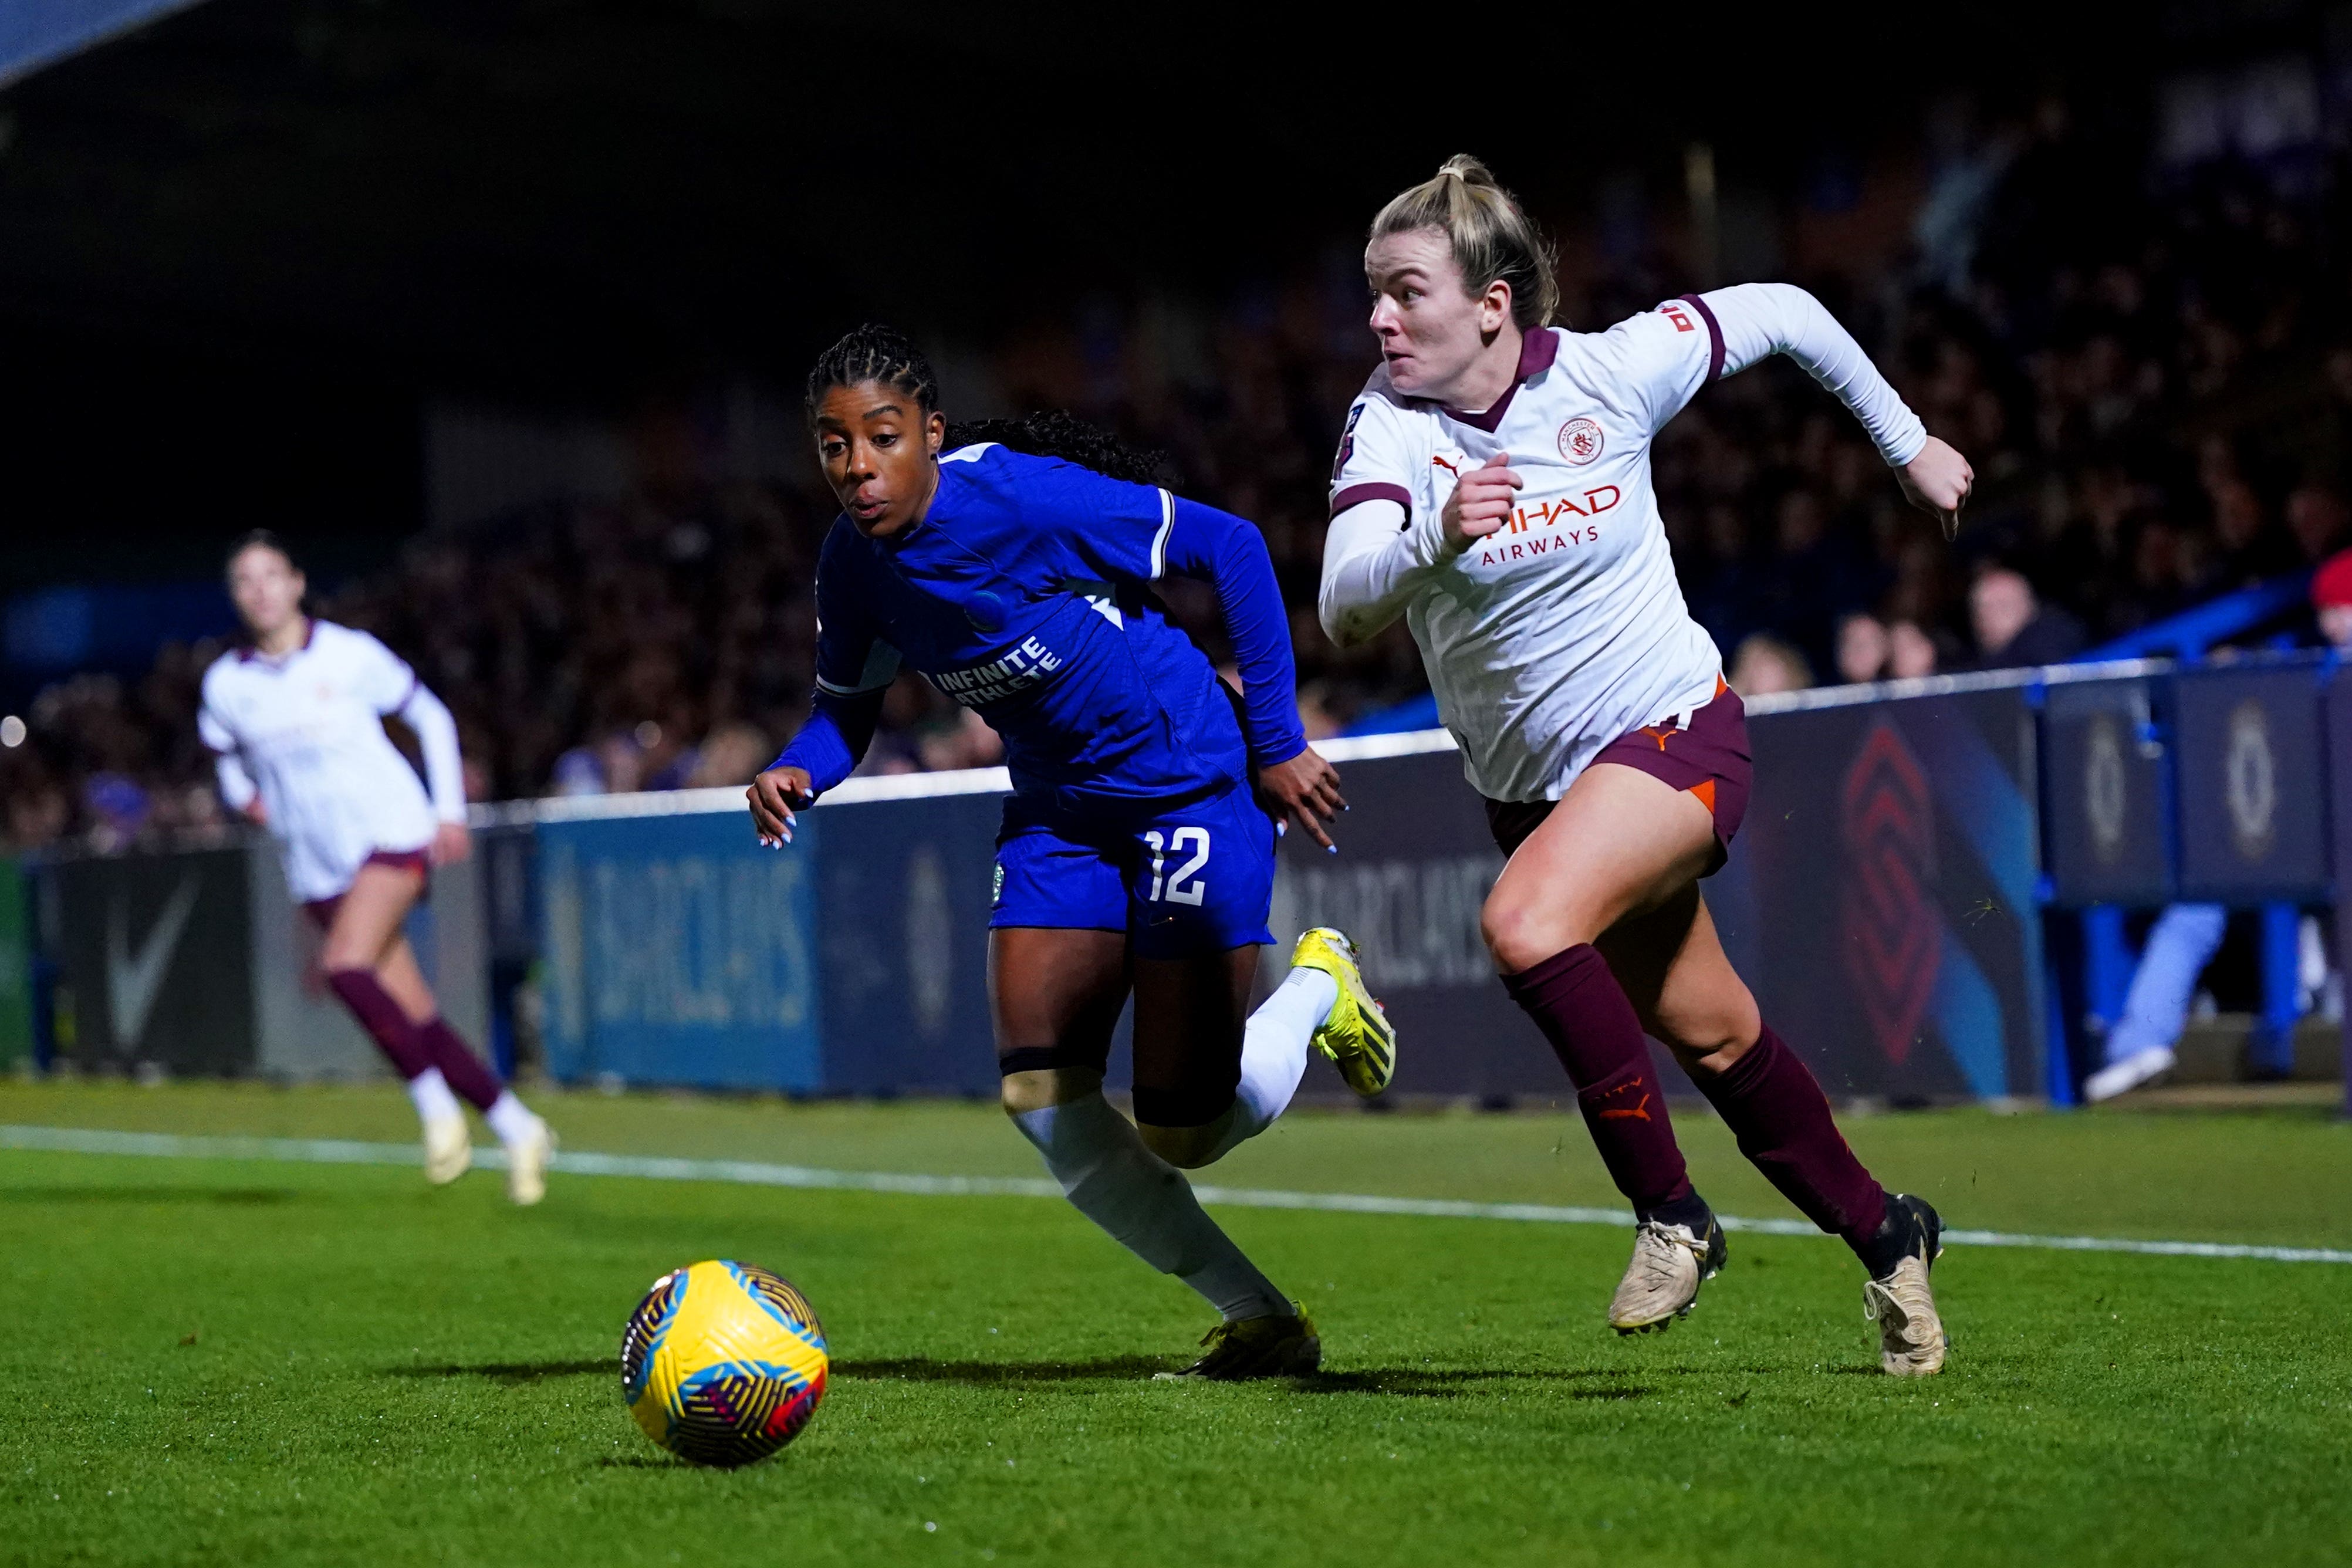 Manchester City and Chelsea are battling for the Women’s Super League title